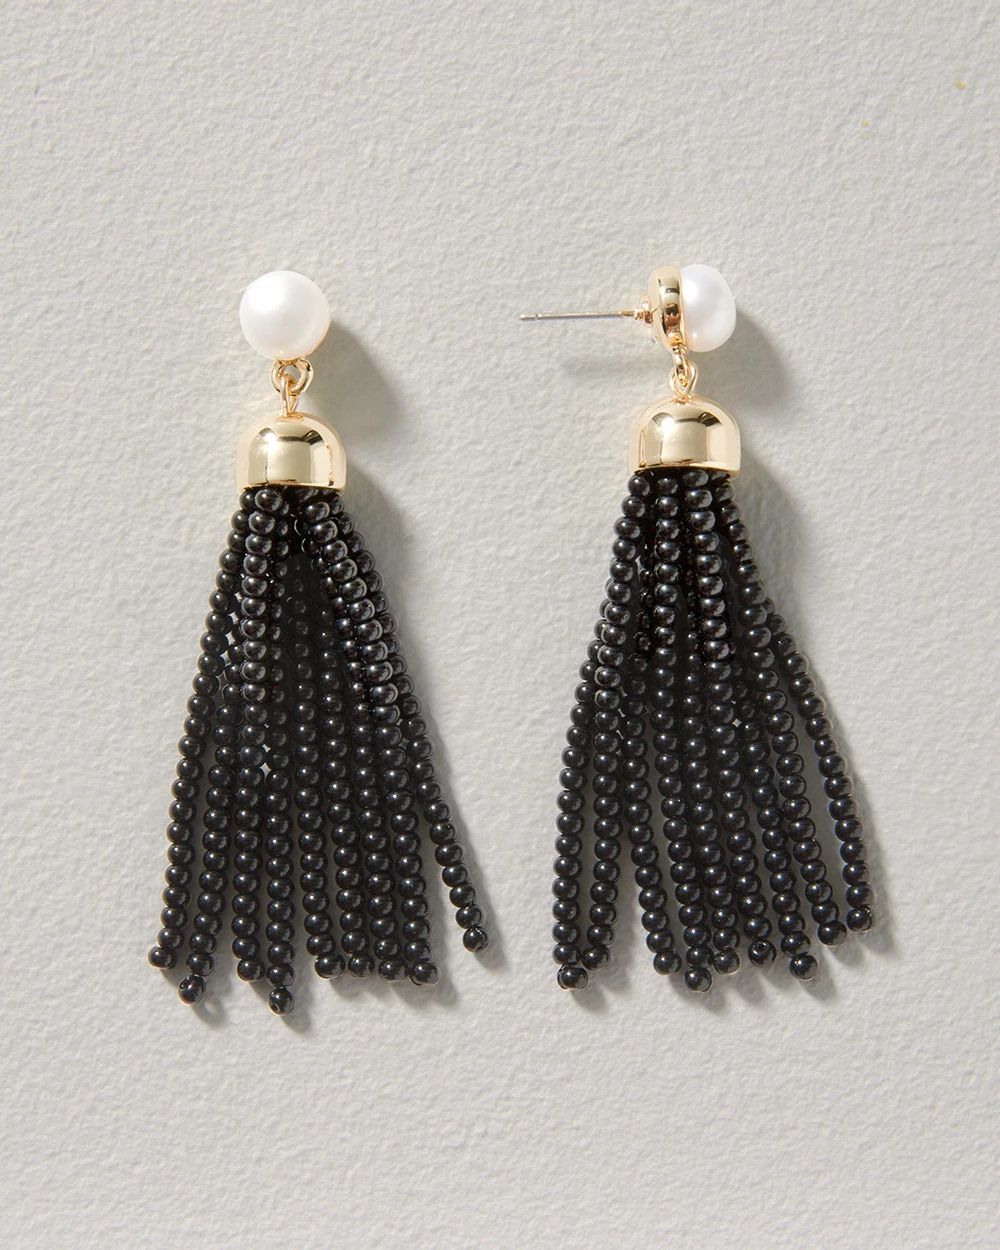 Black Tassel Earrings click to view larger image.